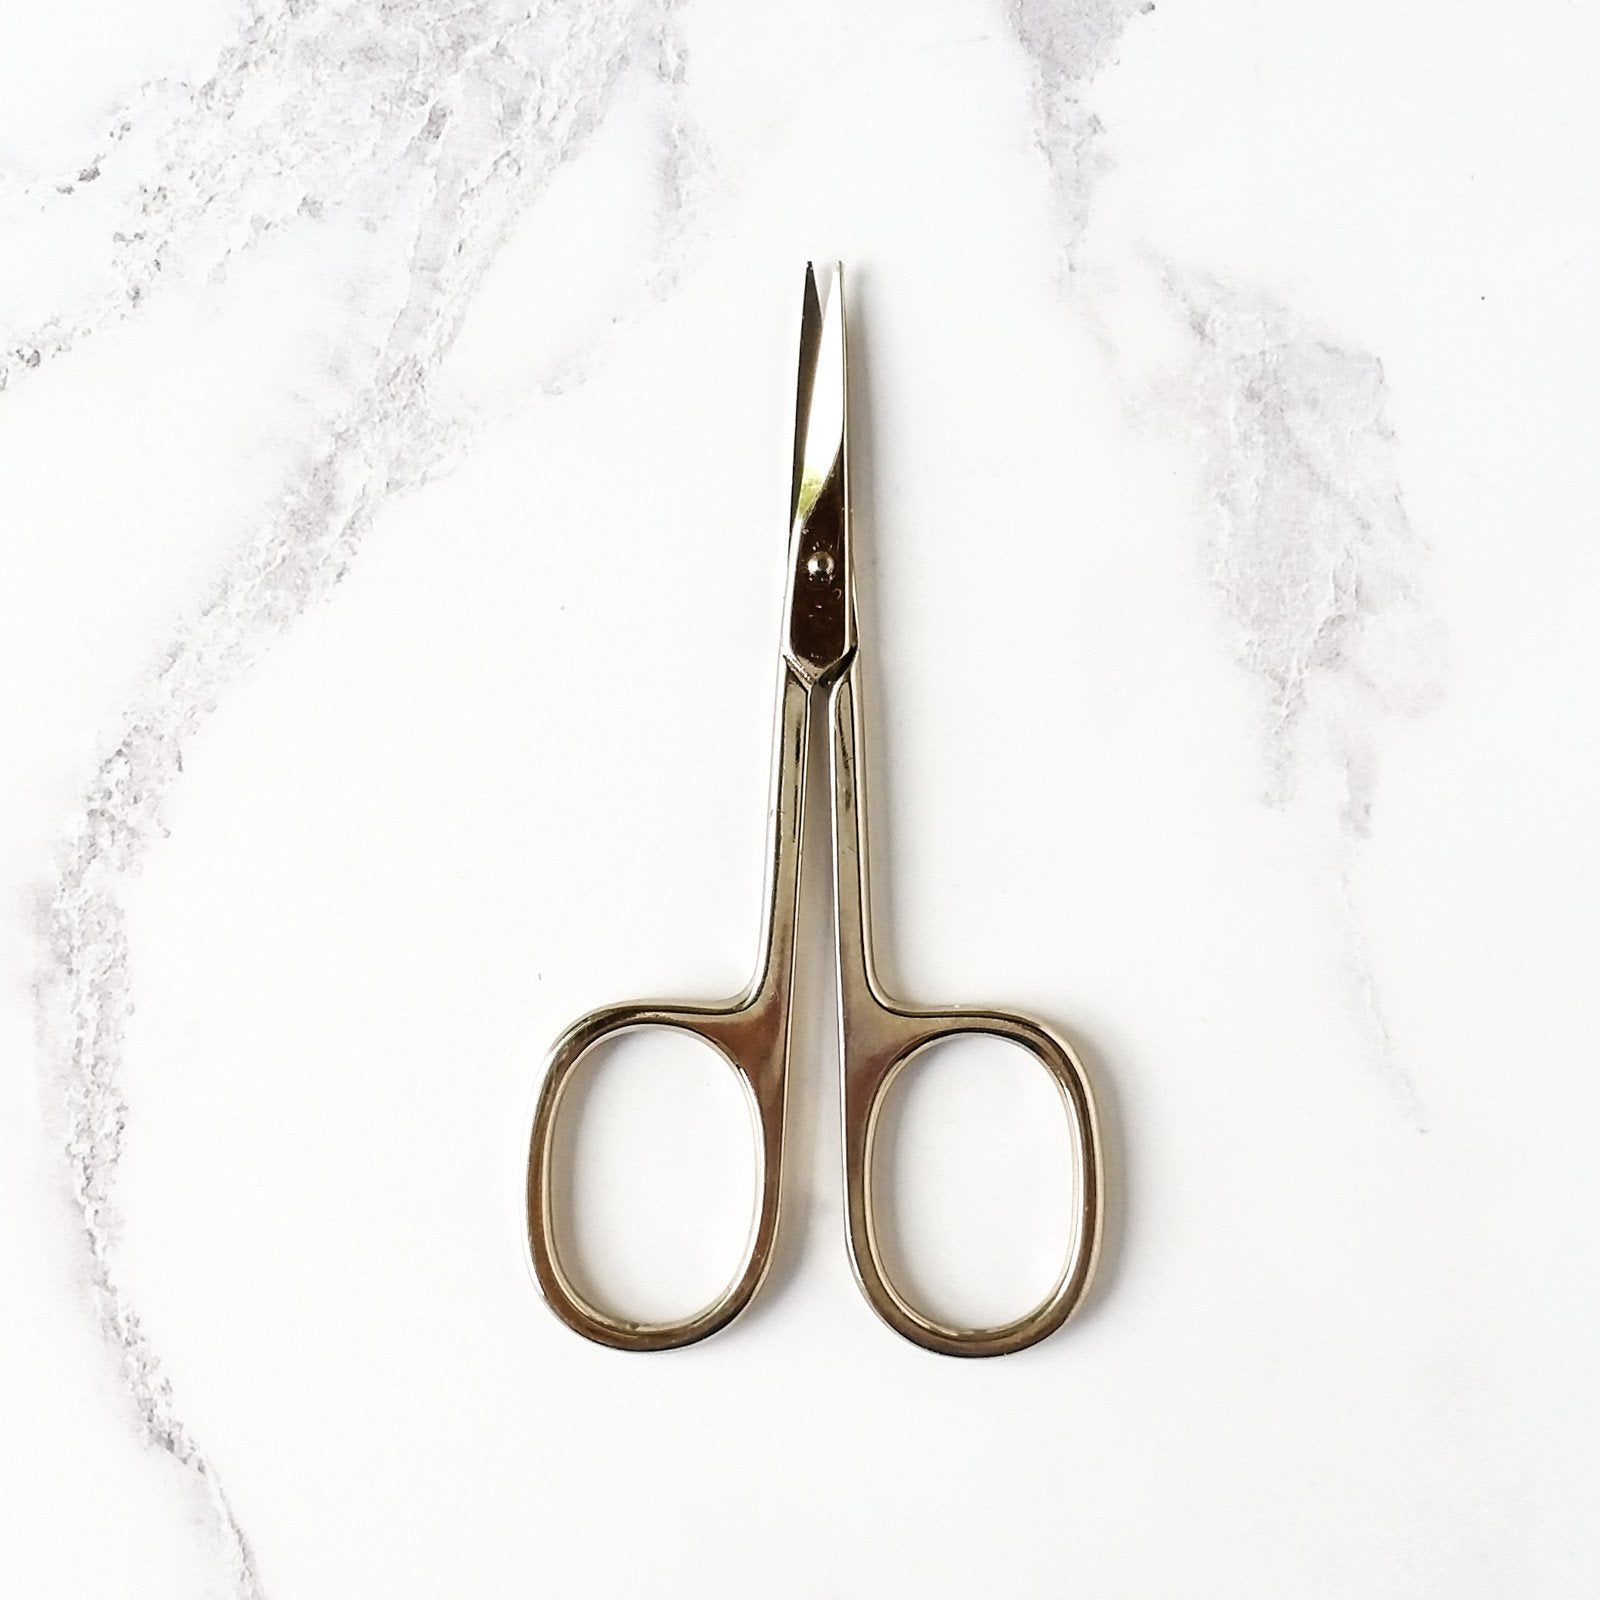 True Left Handed Double Curved Embroidery Scissors - 850014933210